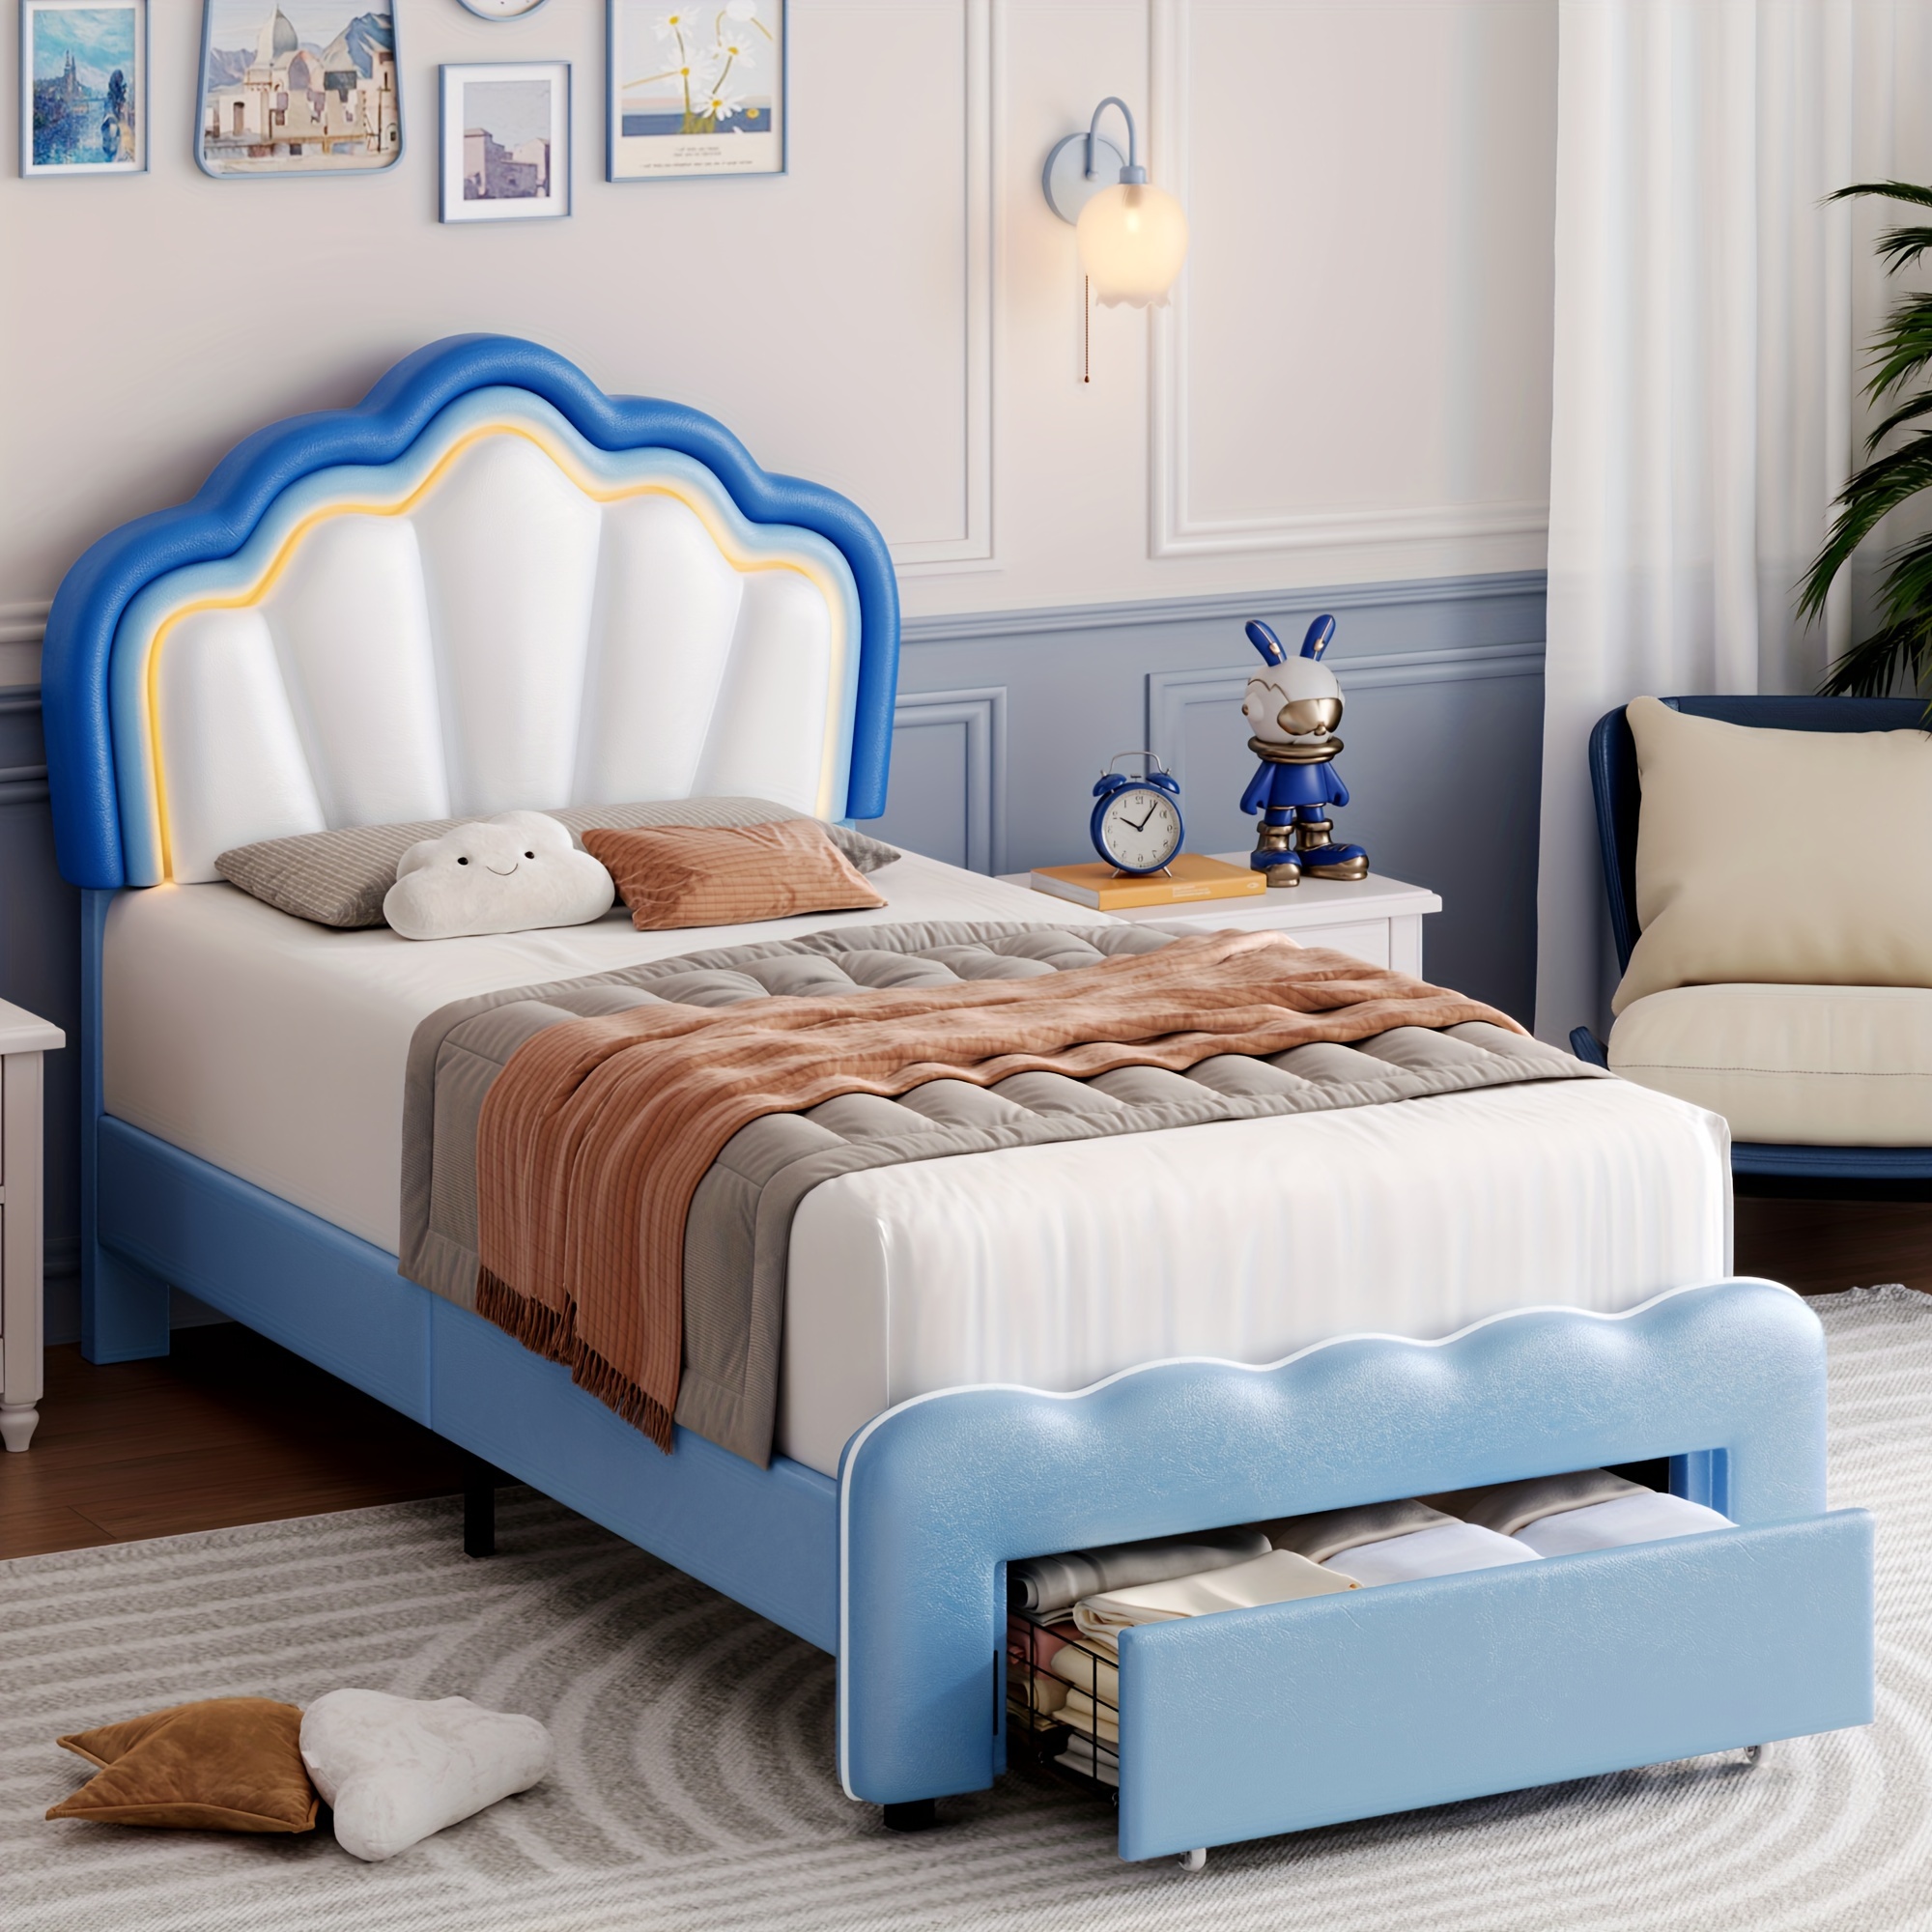 

Fultru Twin/full Led Bed Frame, Pink/ Blue Platform Bed With Large Drawer, Modern Upholstered Bed With Adjustable Lotus Headboard, Cute Girls/princess Bed, Wooden Slats Support, No Box Spring Needed